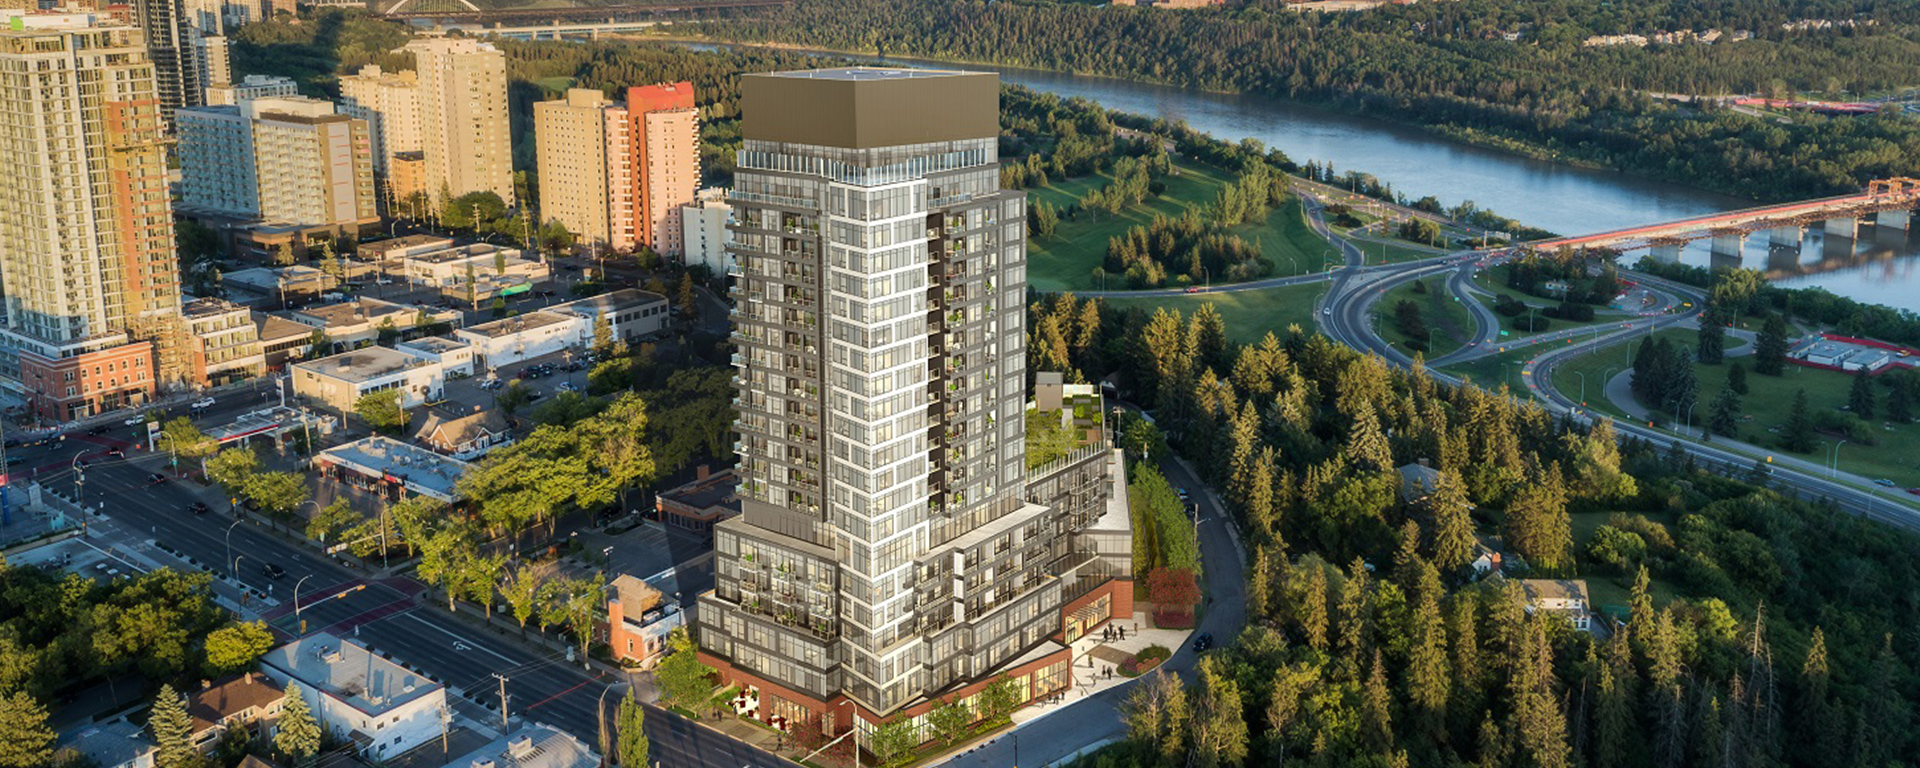 ONE Properties and Revera break ground on “Glenora Park” – a luxury retirement residence with stunning river valley views in the heart of Edmonton